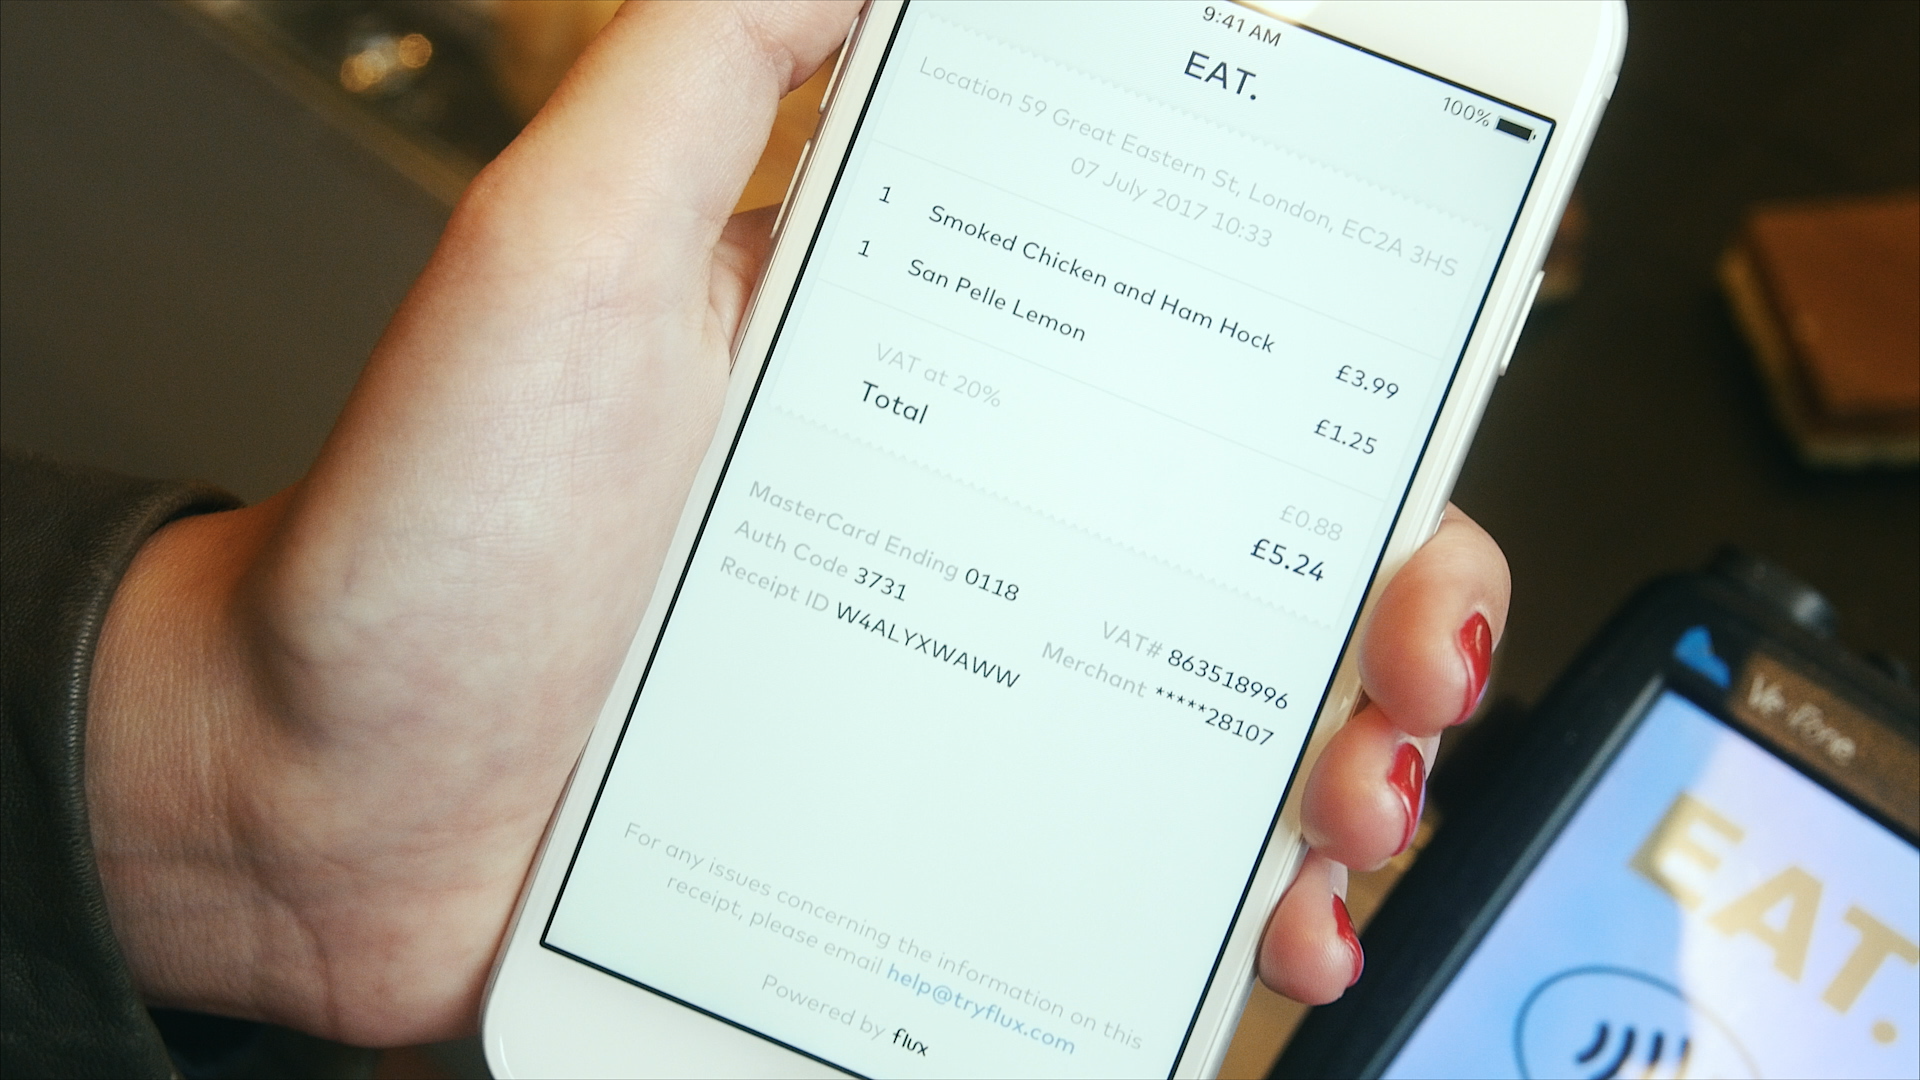 Fintech startup Flux partners with Barclays for itemised receipts